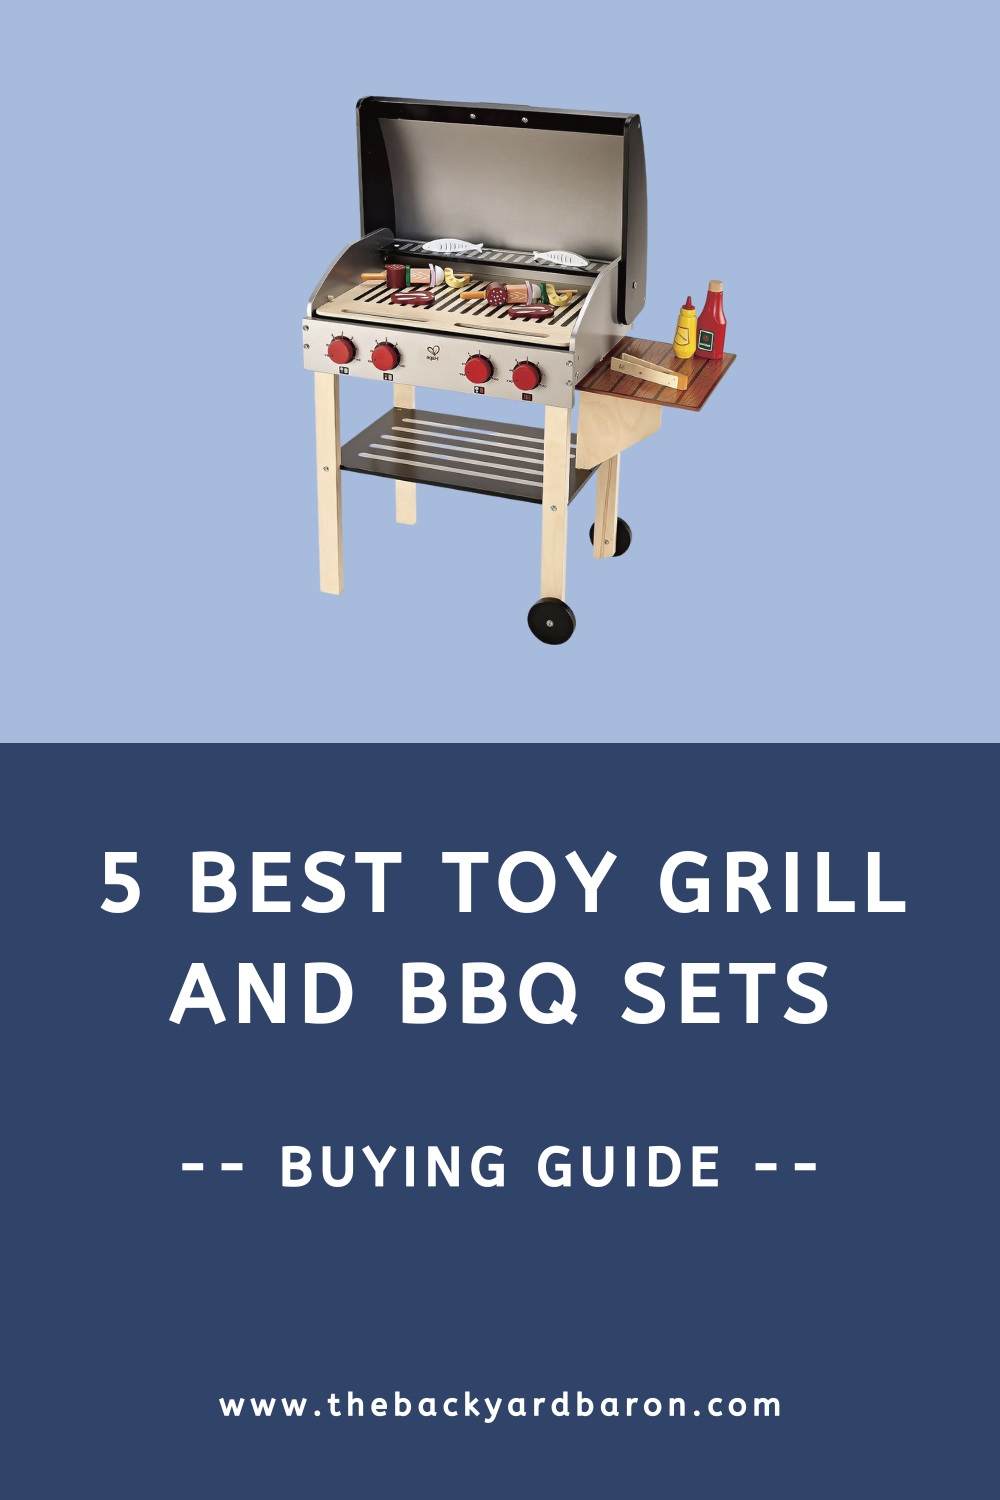 Toy grill and BBQ set buying guide